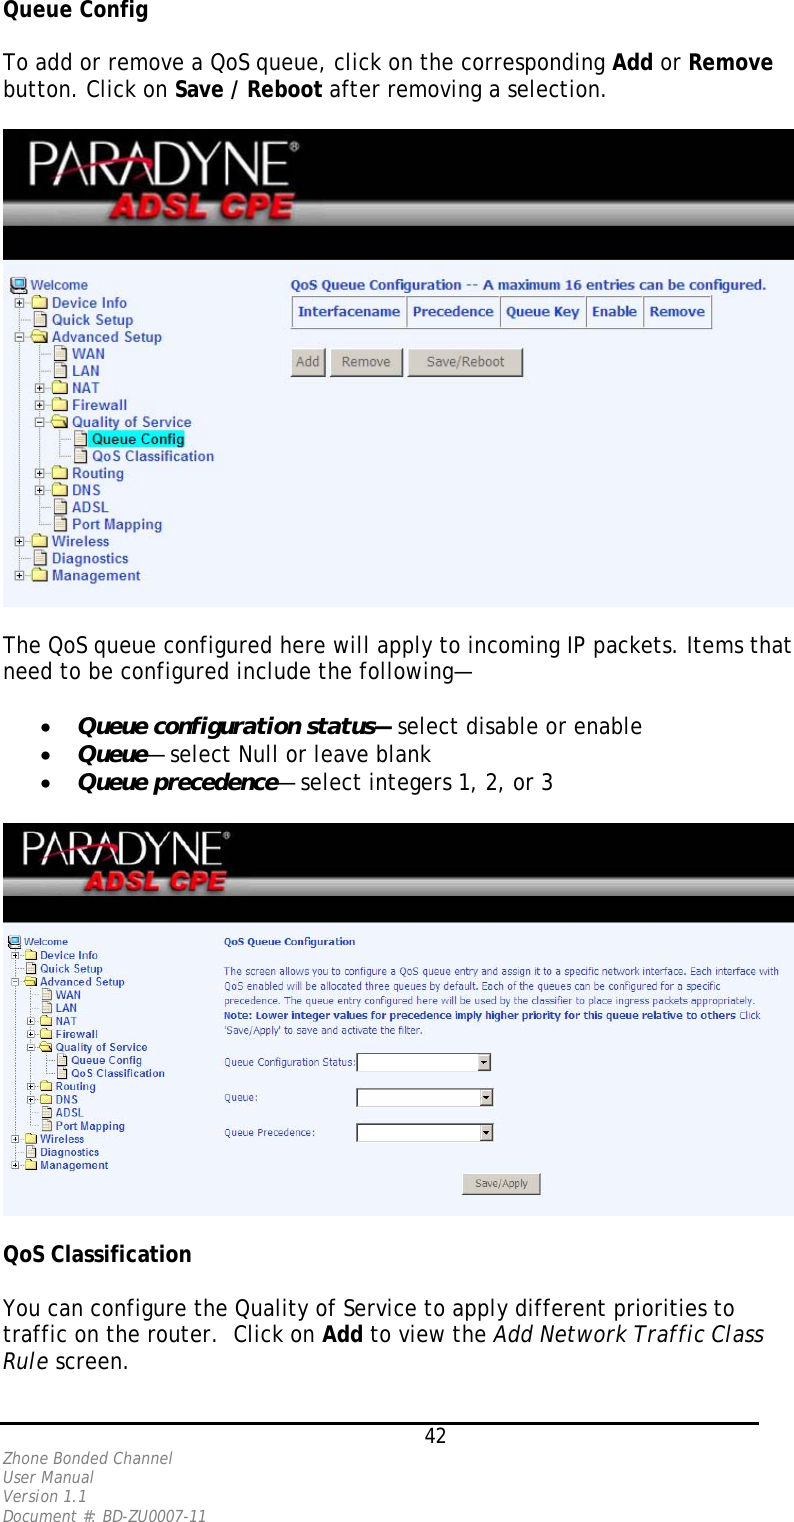 Queue Config  To add or remove a QoS queue, click on the corresponding Add or Remove button. Click on Save / Reboot after removing a selection.    The QoS queue configured here will apply to incoming IP packets. Items that need to be configured include the following—  •  Queue configuration status— select disable or enable •  Queue— select Null or leave blank •  Queue precedence— select integers 1, 2, or 3    QoS Classification  You can configure the Quality of Service to apply different priorities to traffic on the router.  Click on Add to view the Add Network Traffic Class Rule screen.   42 Zhone Bonded Channel User Manual  Version 1.1 Document #: BD-ZU0007-11 